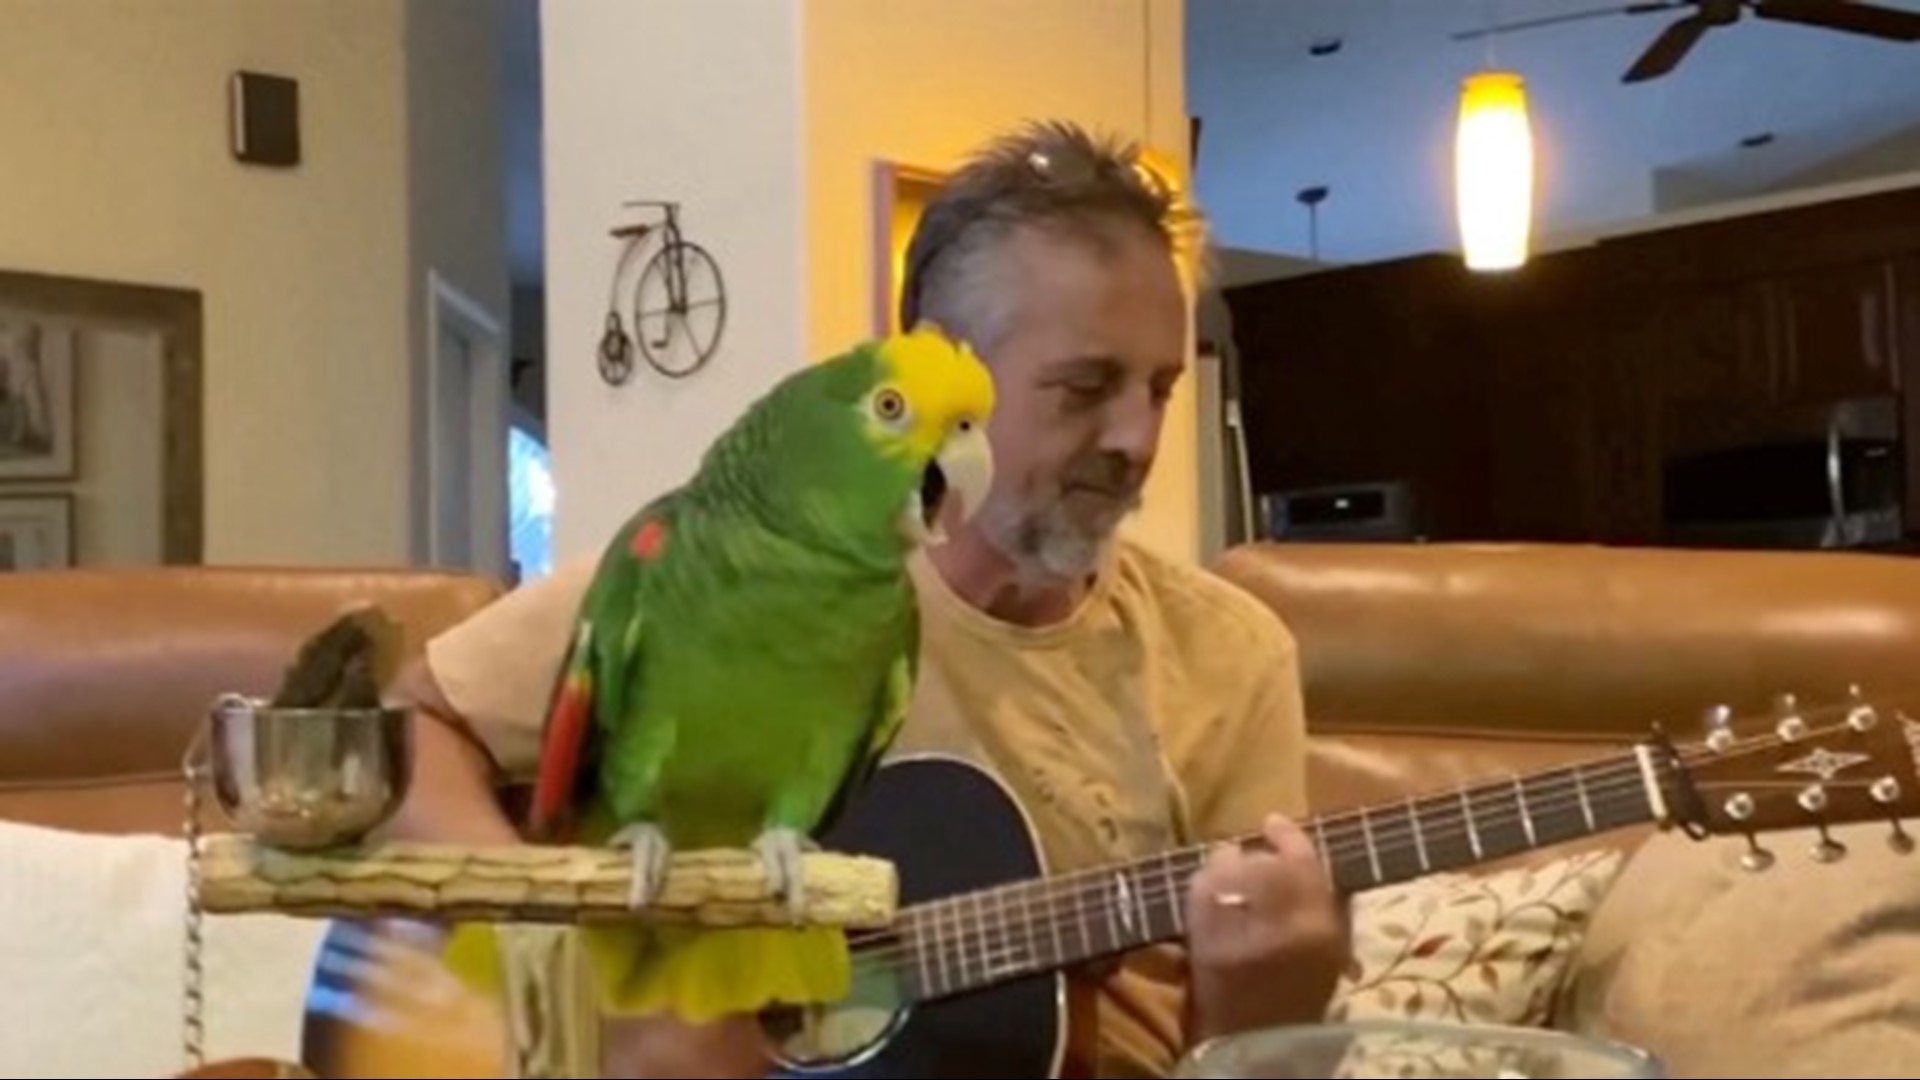 This music-loving parrot sings Bon Jovi, The Beatles and Coldplay, while his owner plays the guitar. Buzz60's Johana Restrepo has more.